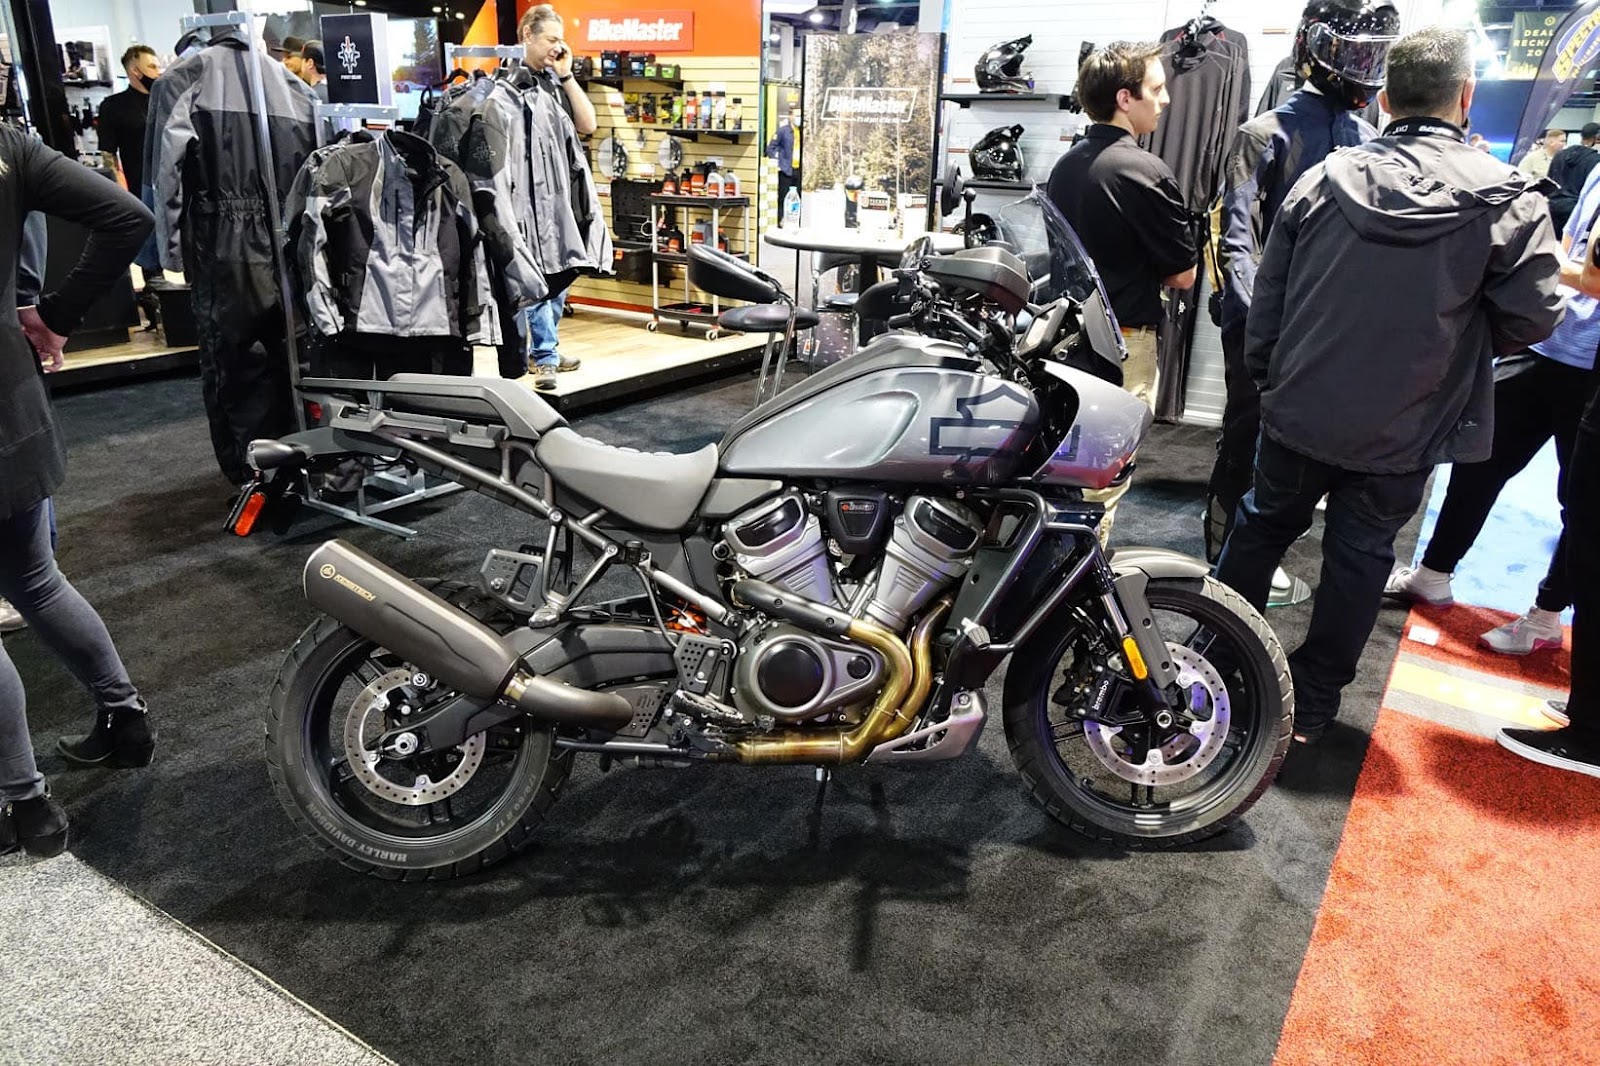 Exclusive glimpses of AIMExpo, the ultimate trade show for powersports industry